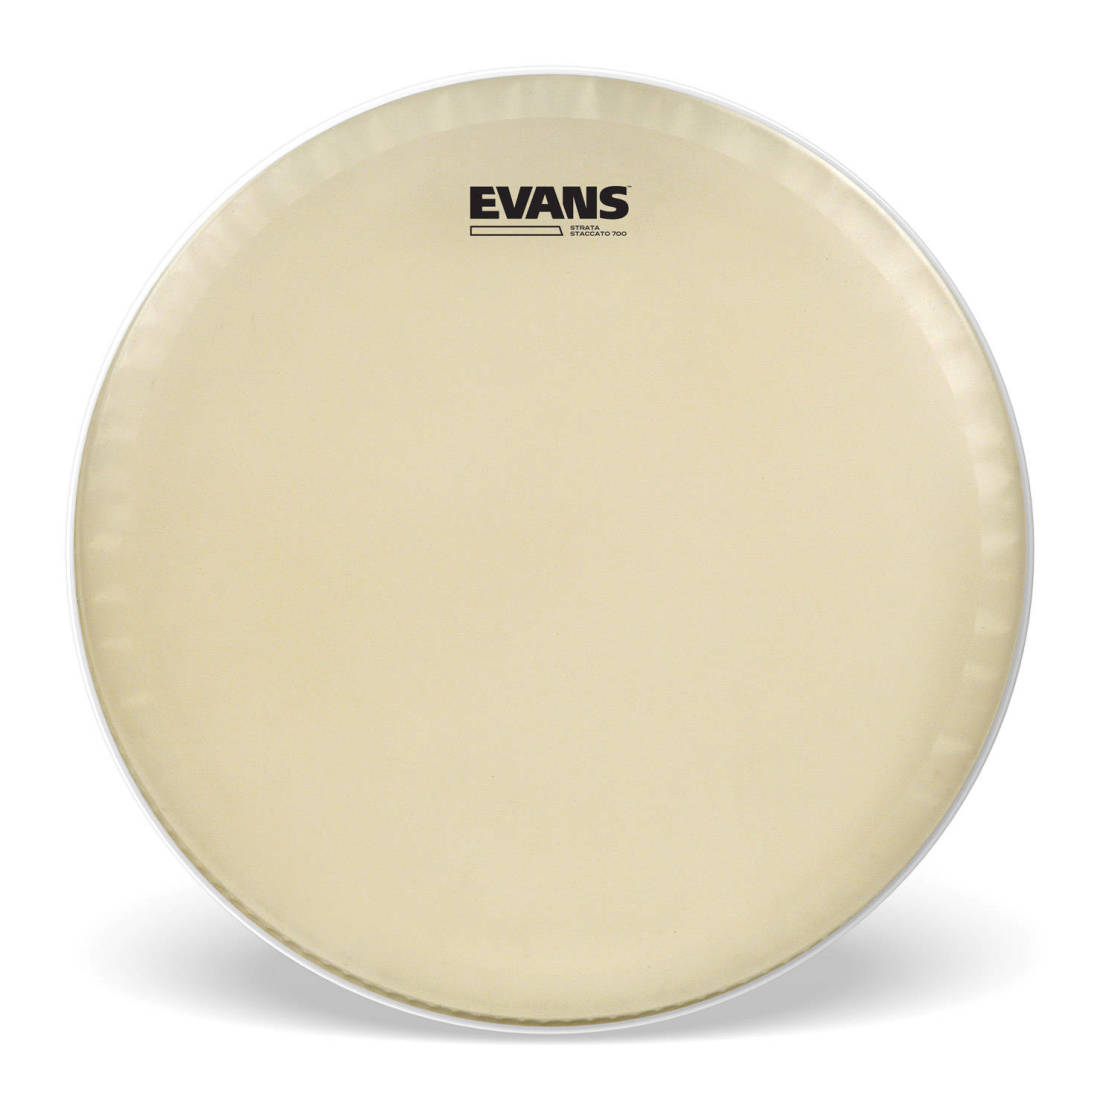 CS14SS - Evans Strata Staccato 700 Concert Snare Drum Head, 14 Inch